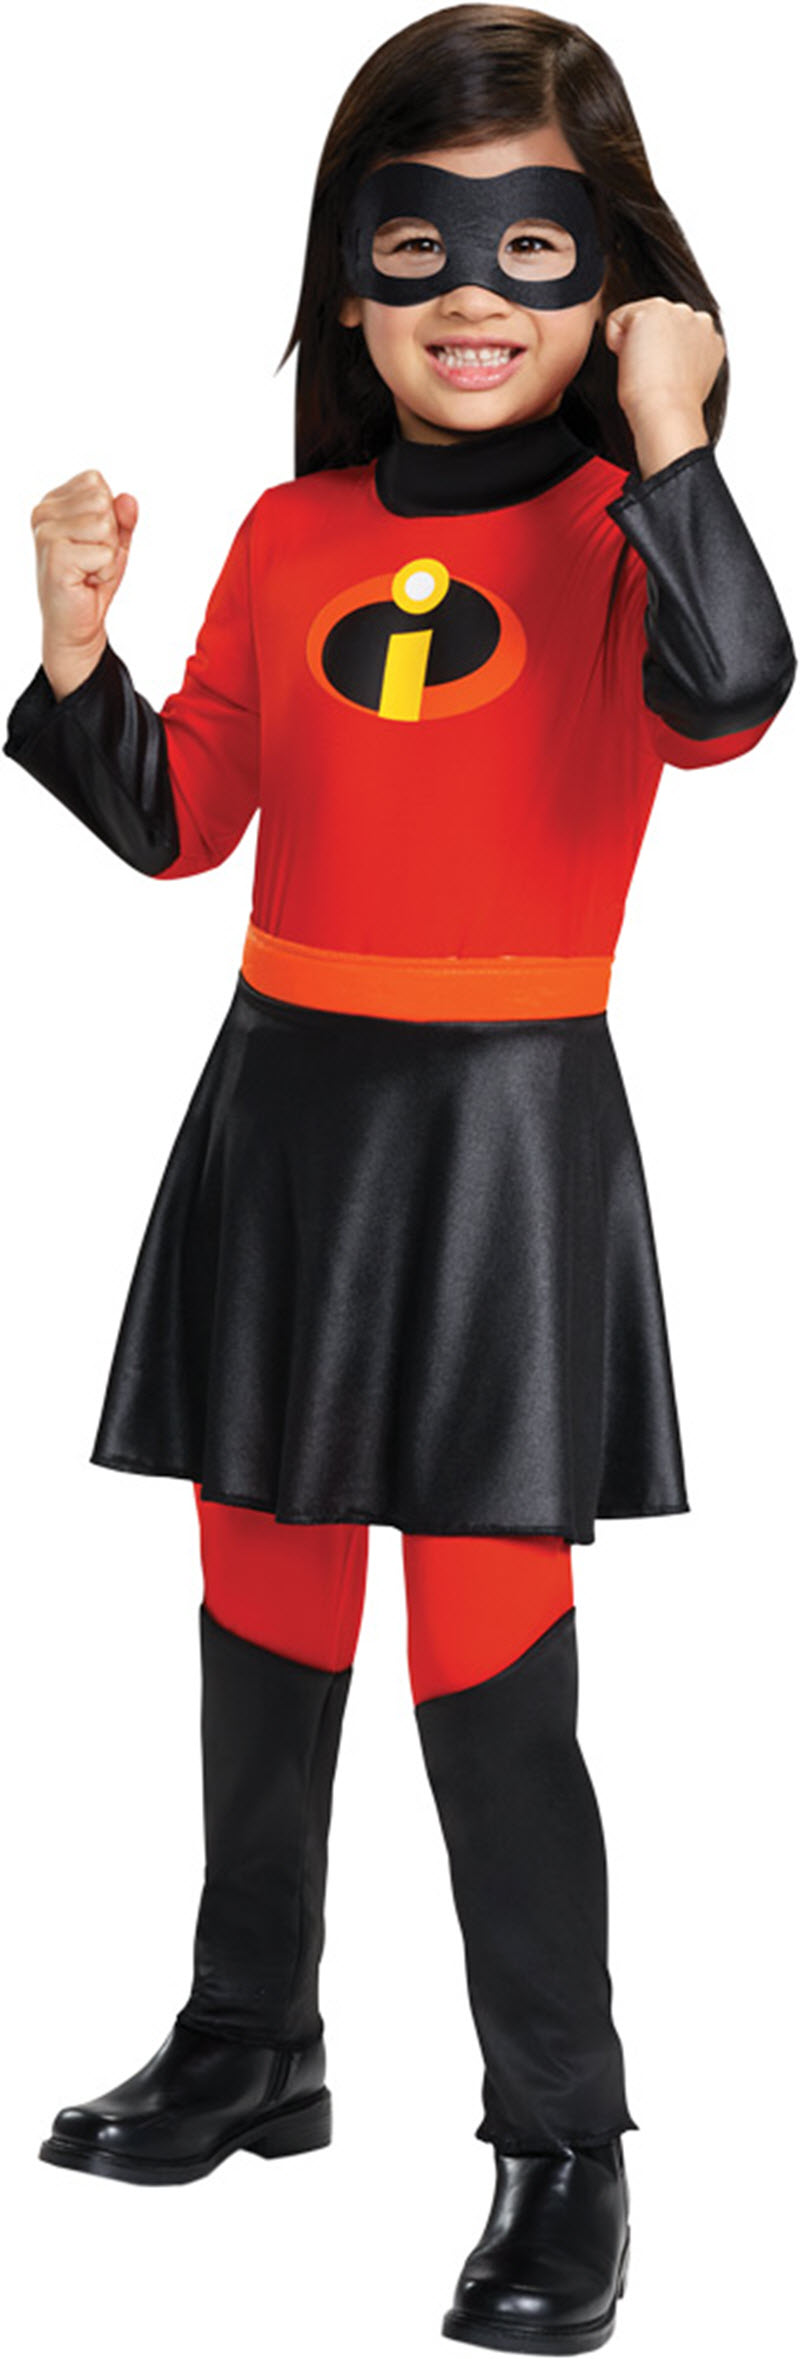 Violet Jumpsuit with Skirt Deluxe Costume - The Incredibles 2